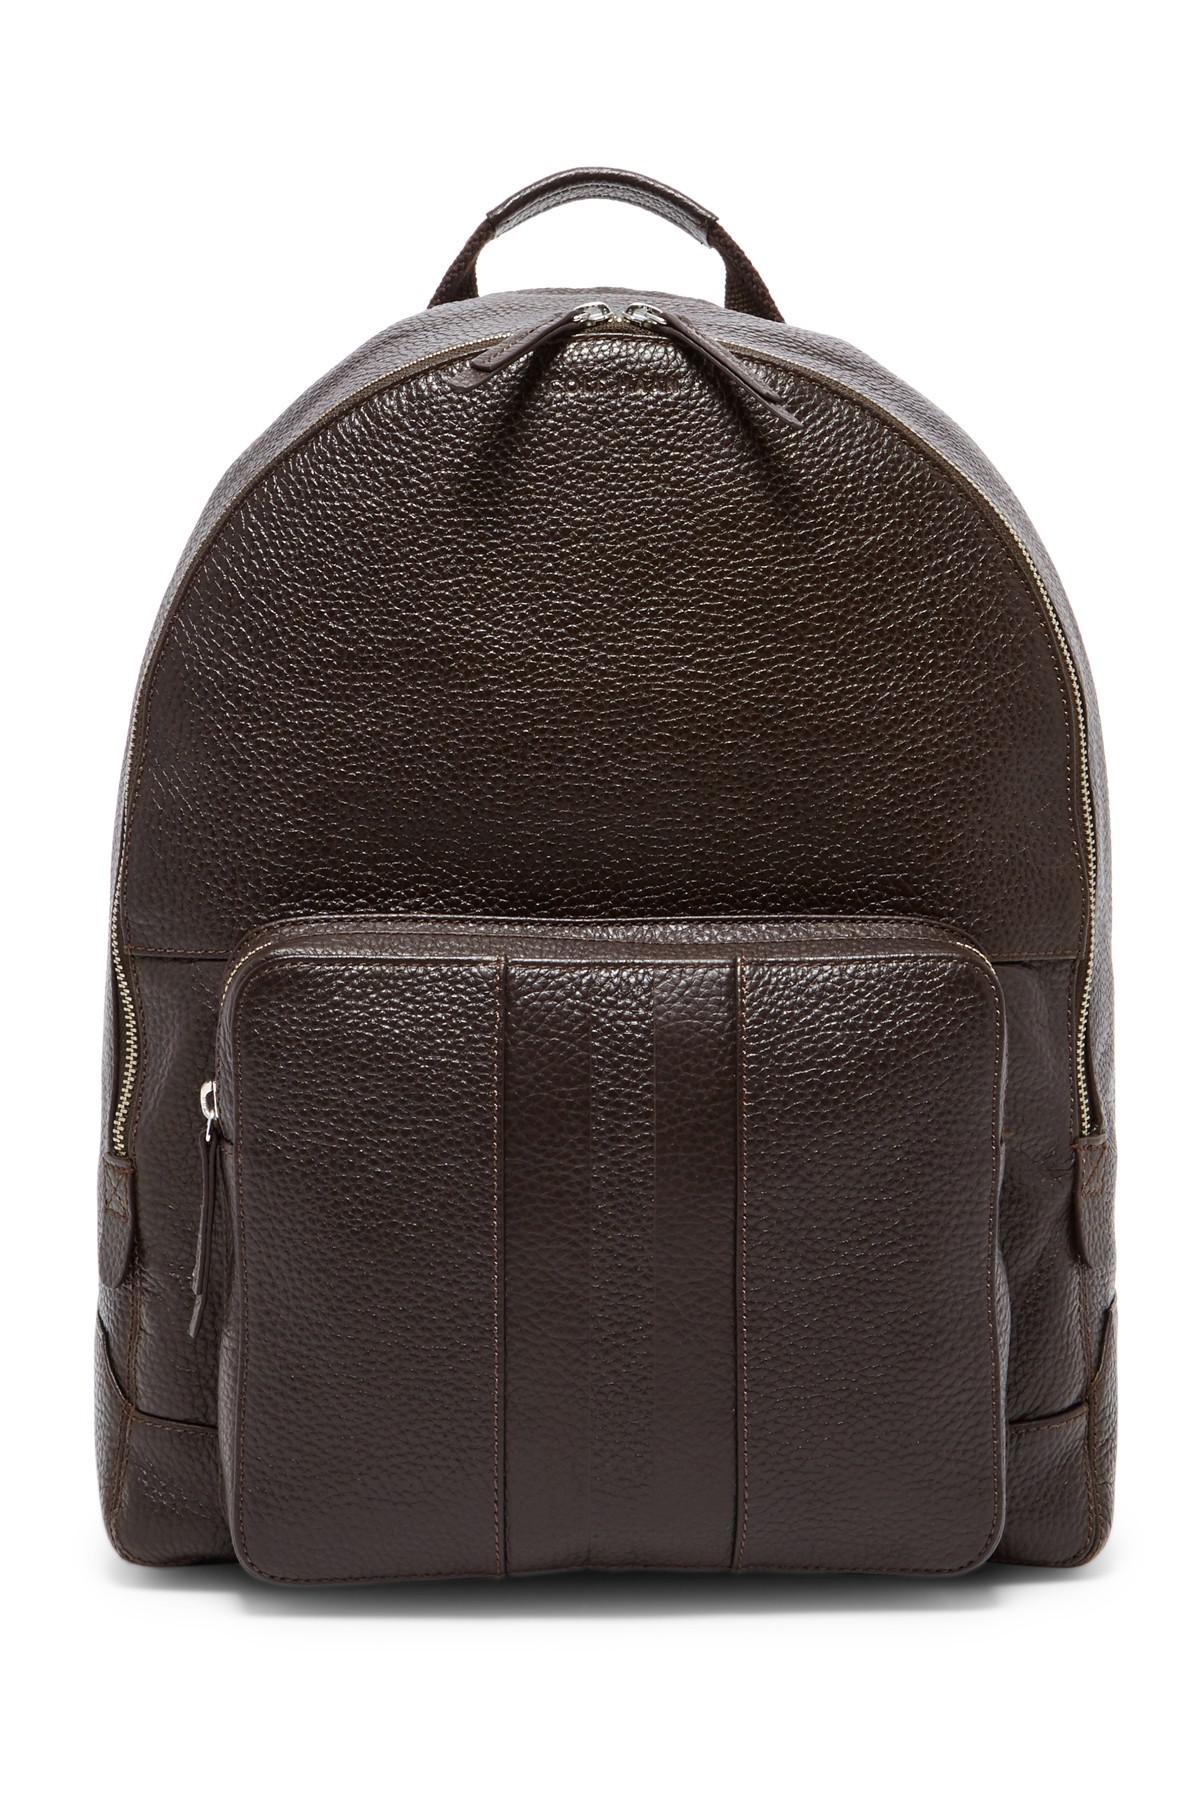 Lyst - Cole Haan Leather Backpack in Brown for Men